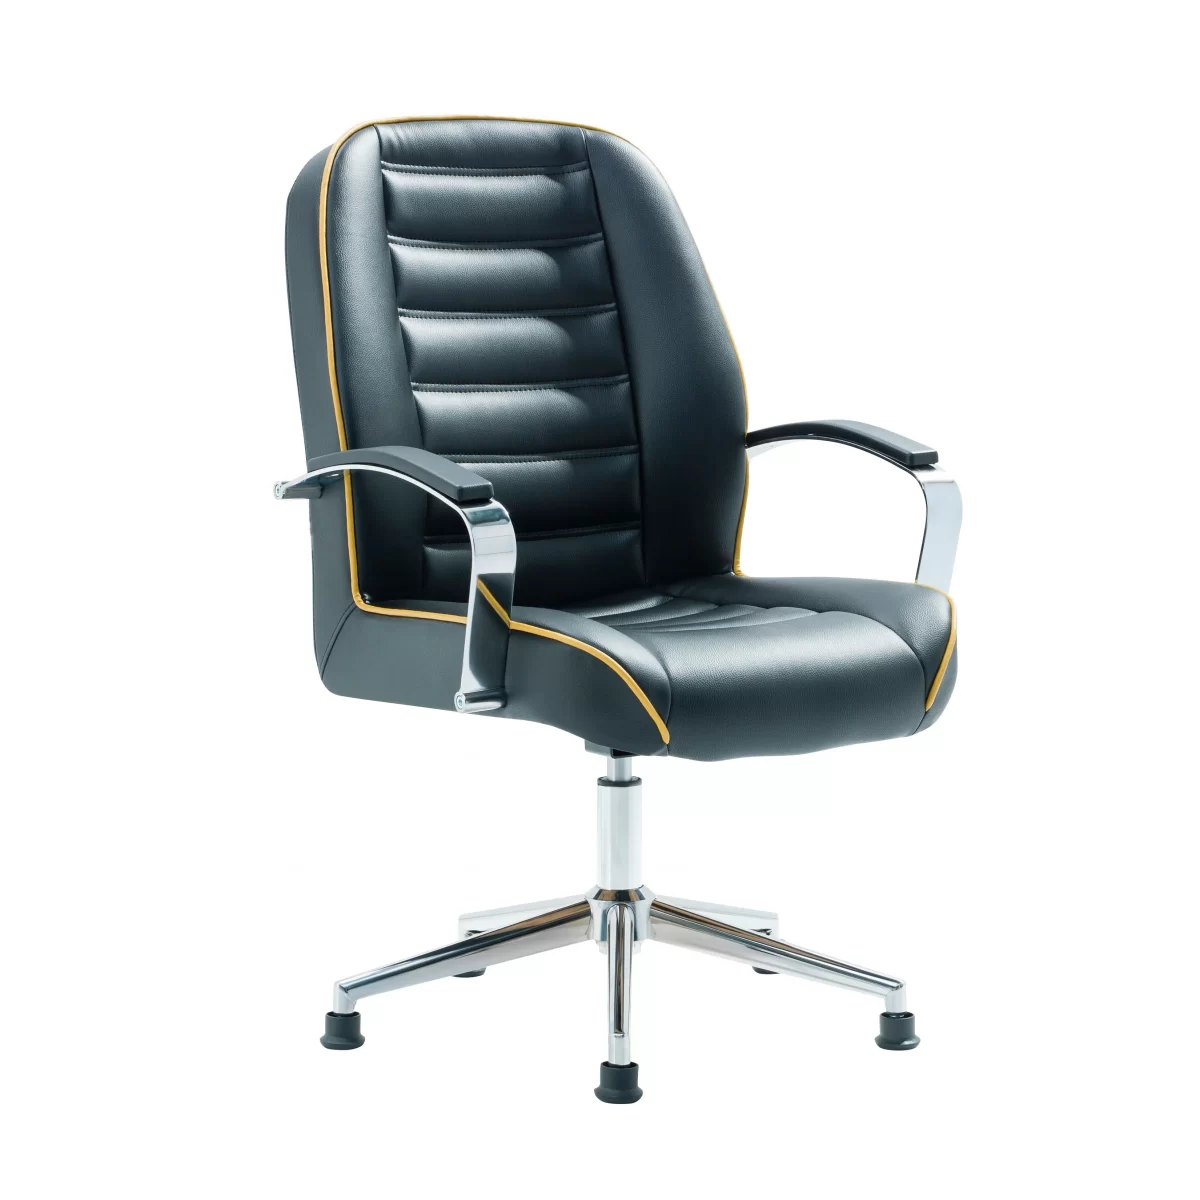 Karina Office Guest Chair Modern Office Chairs Turkey 2 scaled